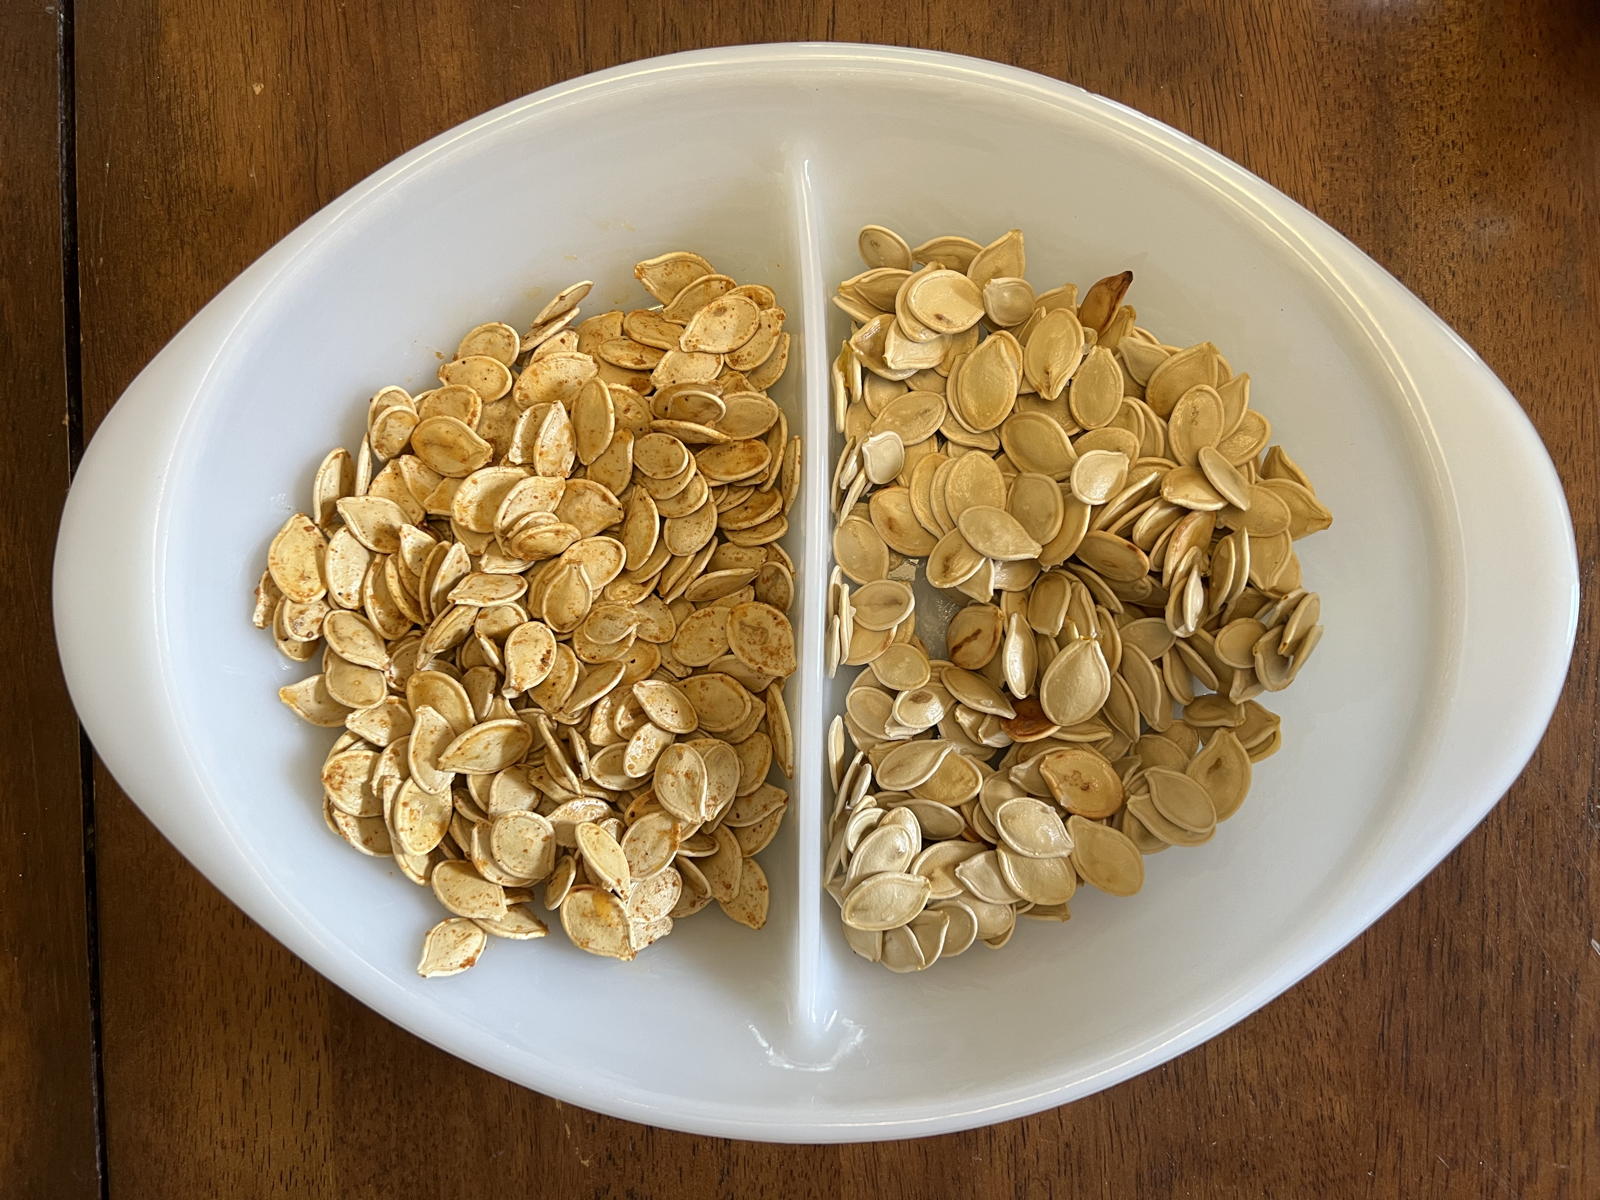 Toasted pumpkin seeds: Mary Monette’s Pumpkin Seeds (Good Snacks), from the 1981 St. Michael’s School Cook Book.; salty snacks; pumpkins